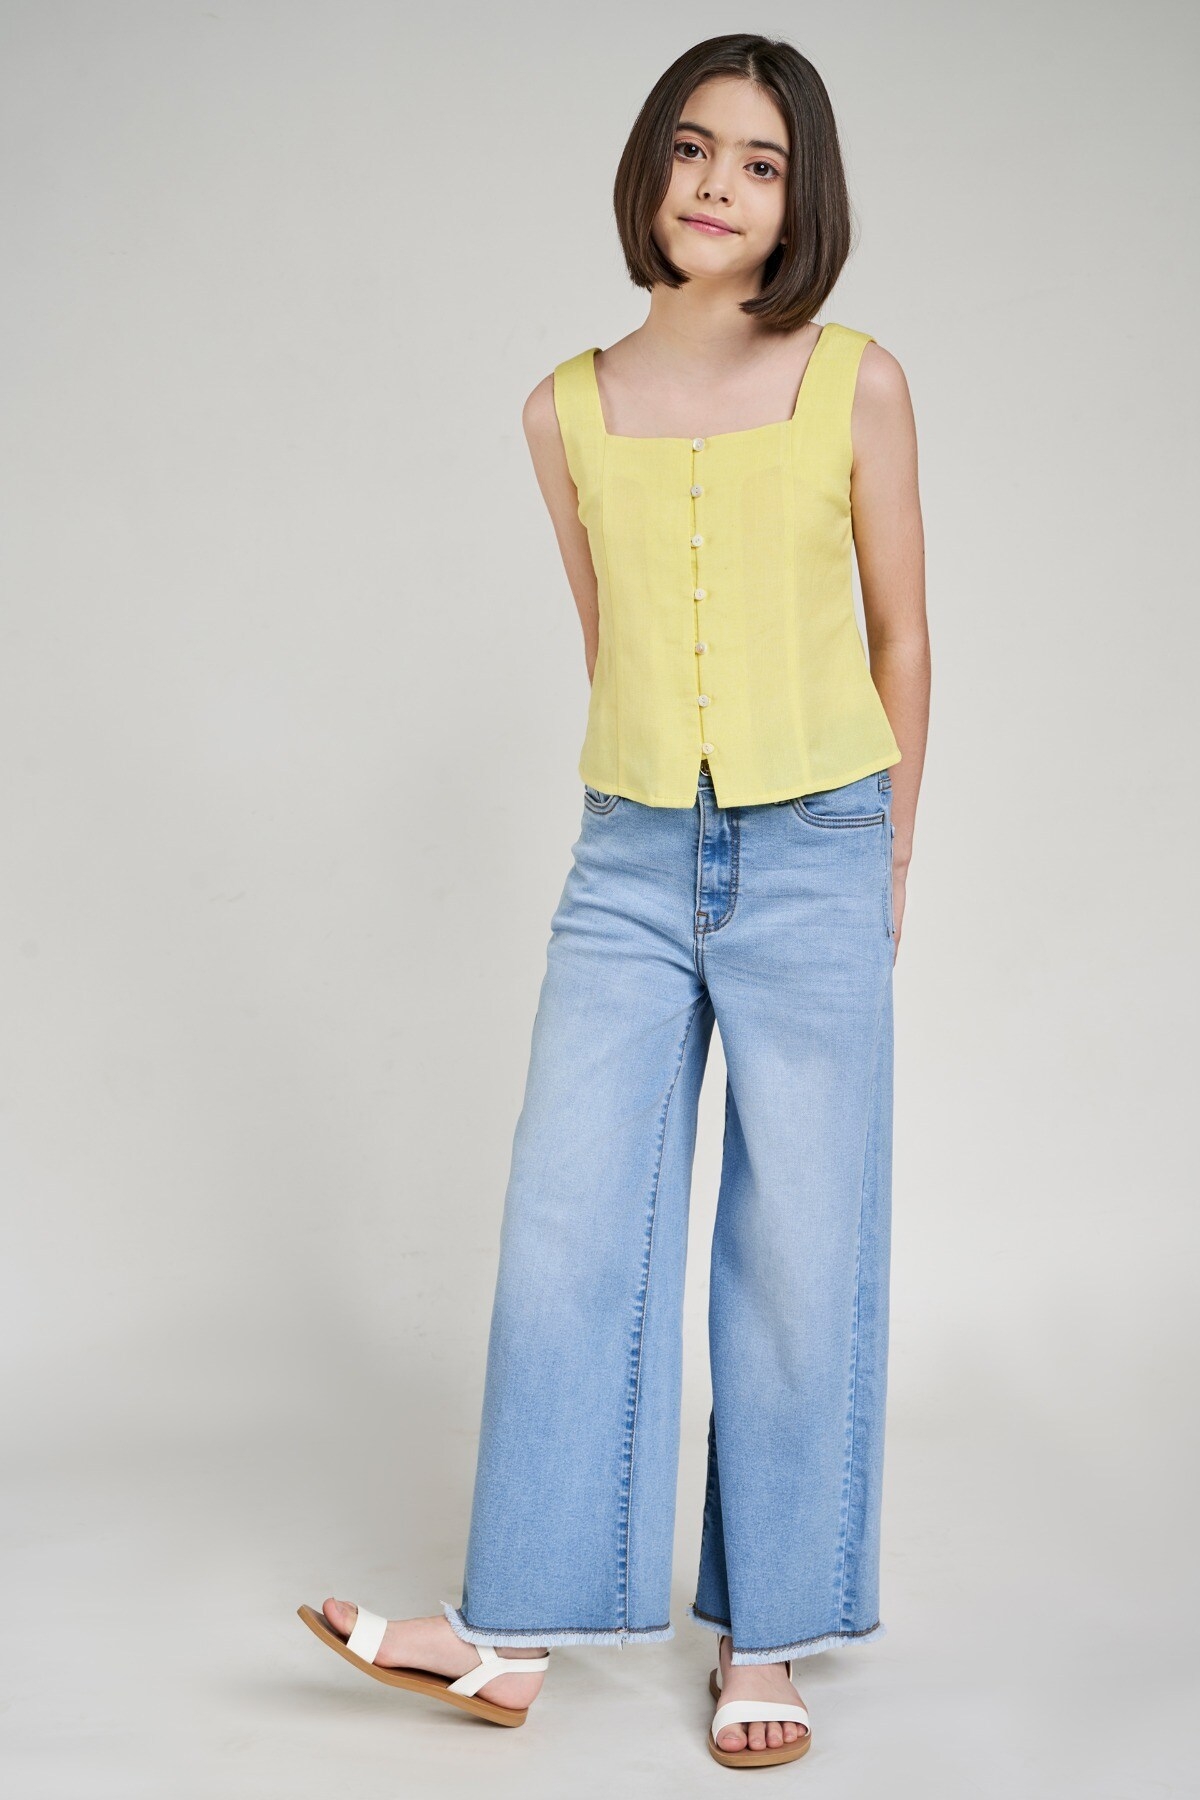 AND | Yellow Solid A-Line Top 1